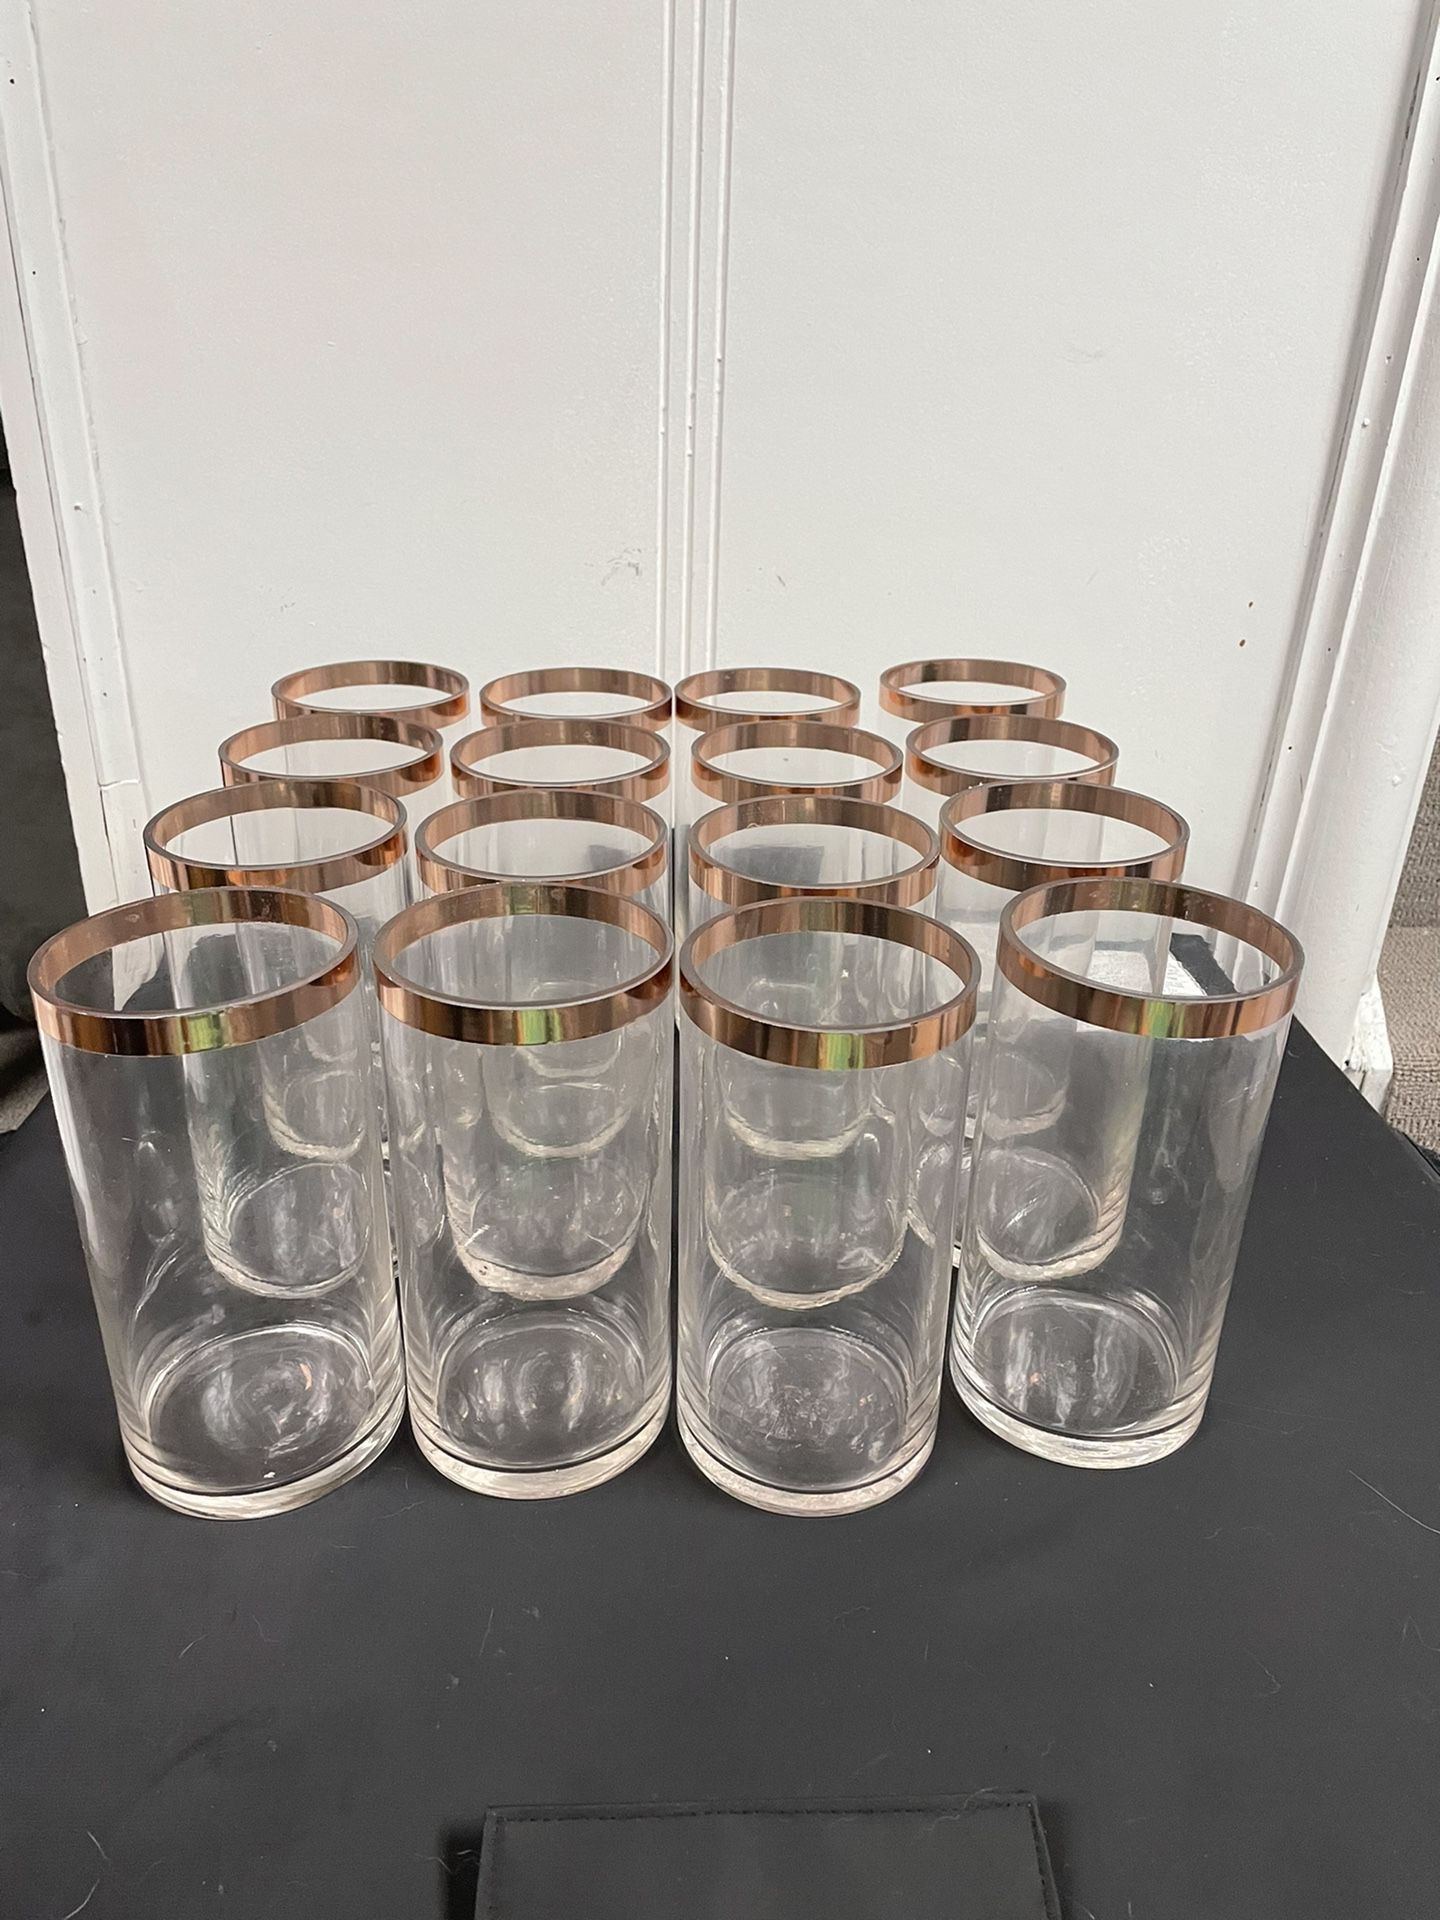 Wedding Glass Vases - Assorted Sizes - Rose Gold And Siler Trim